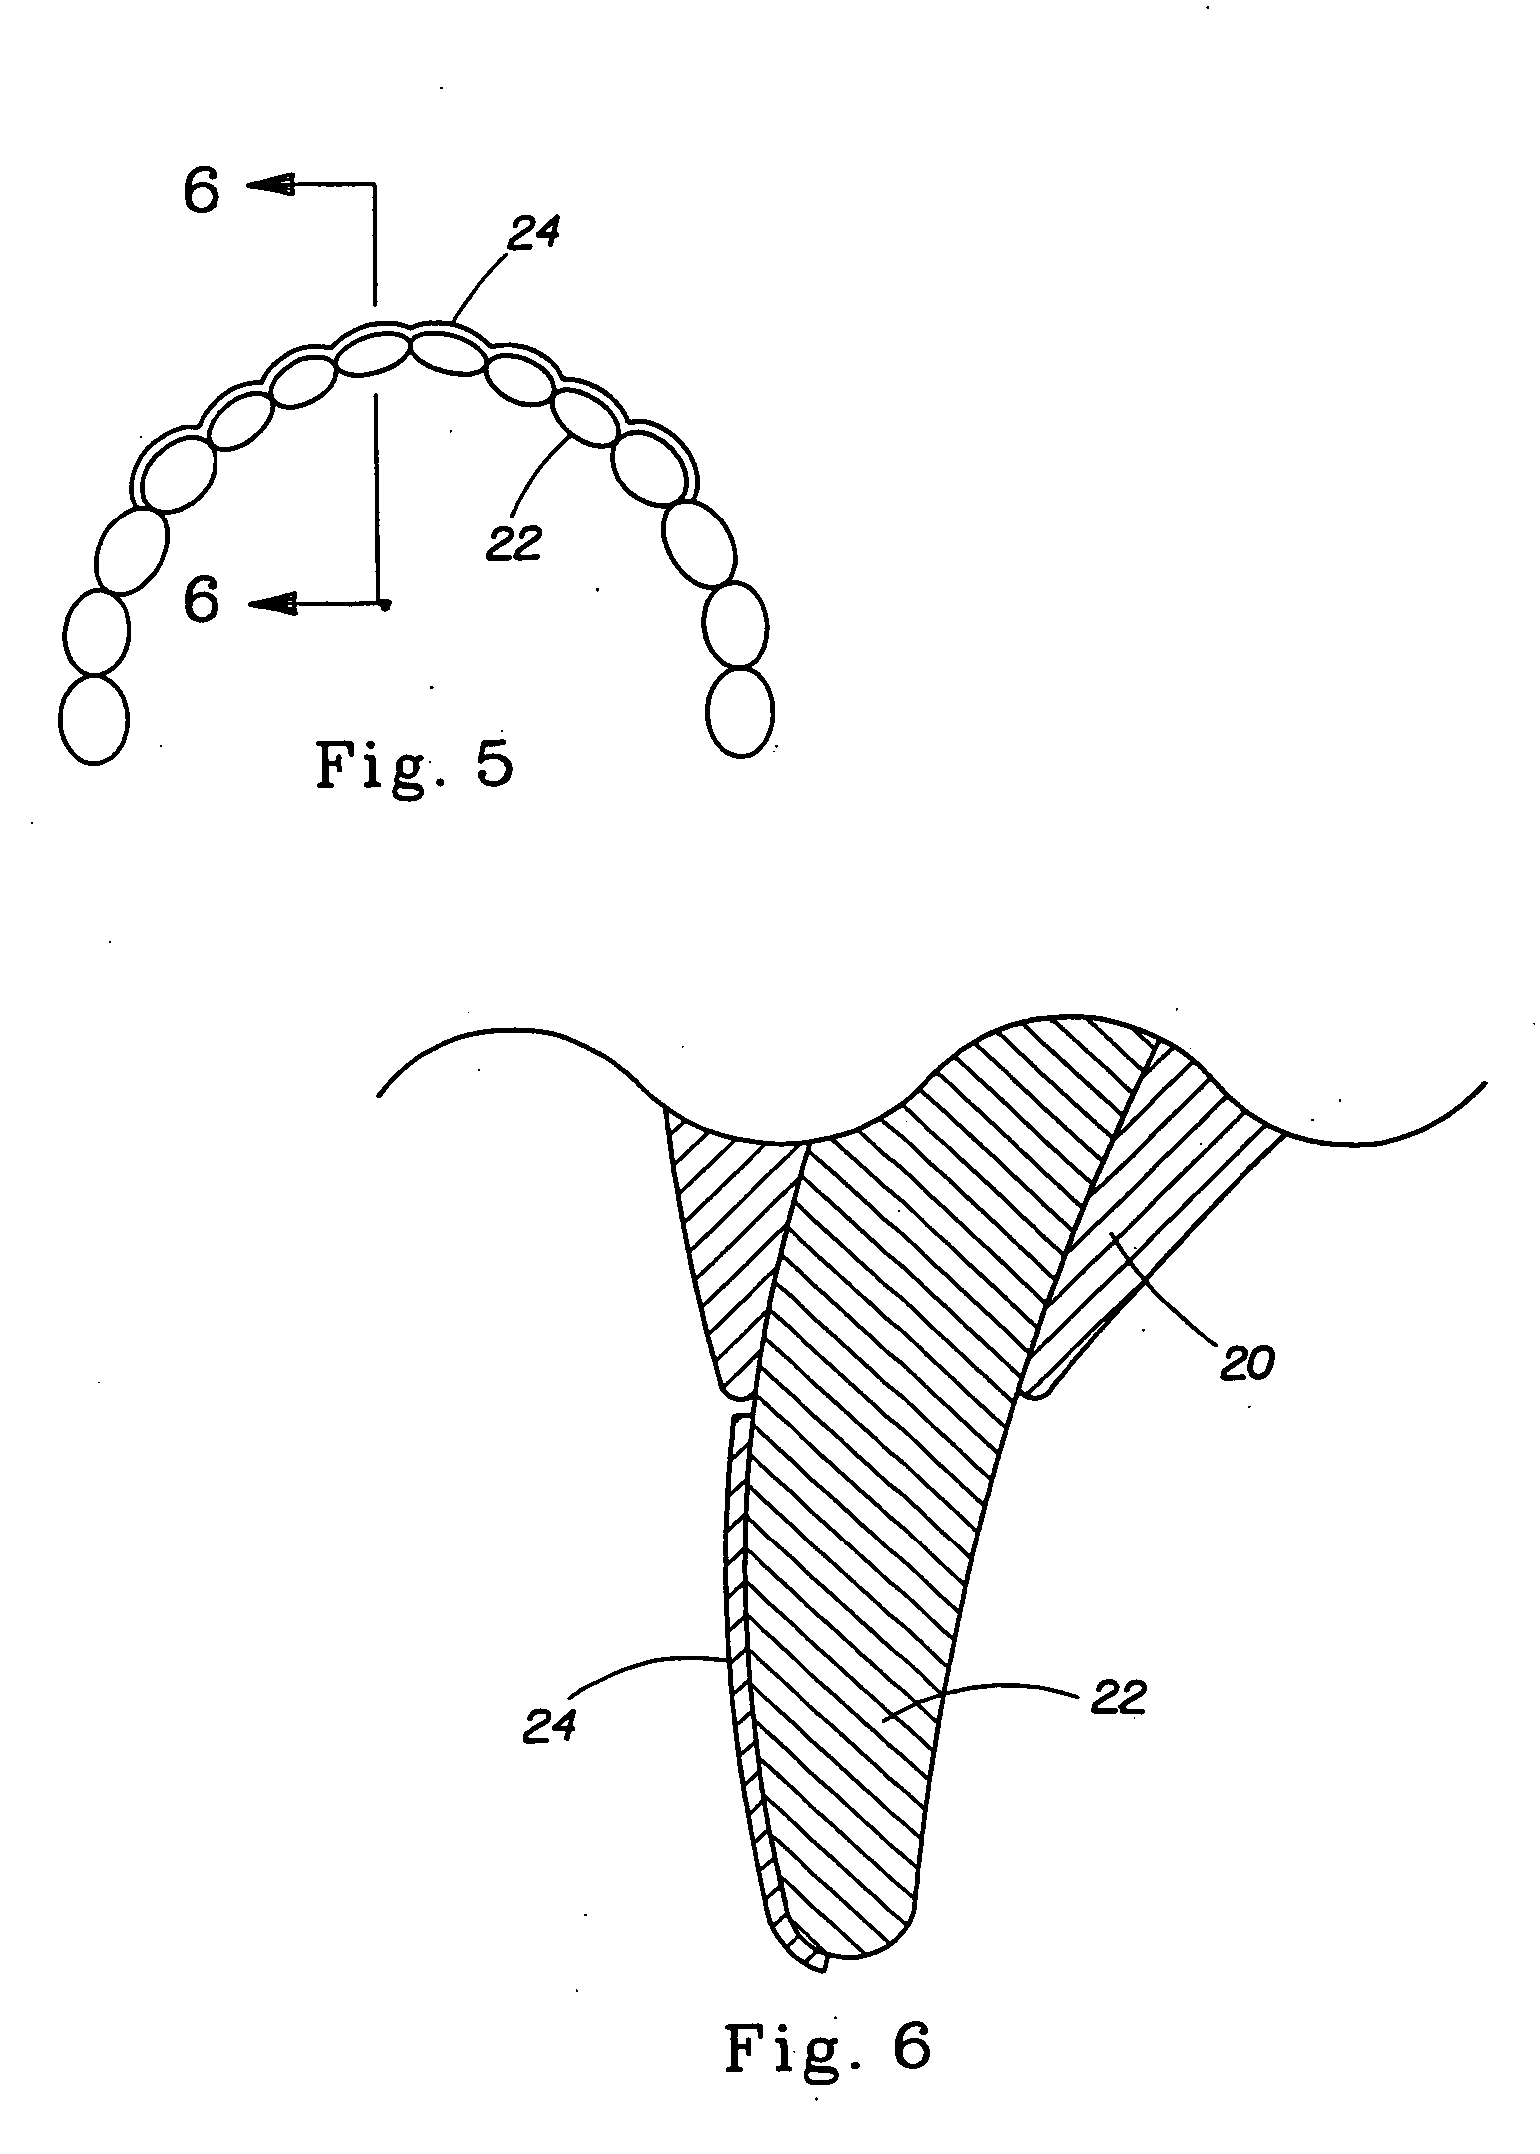 Dye composition and method for detection of demineralized lesions in teeth